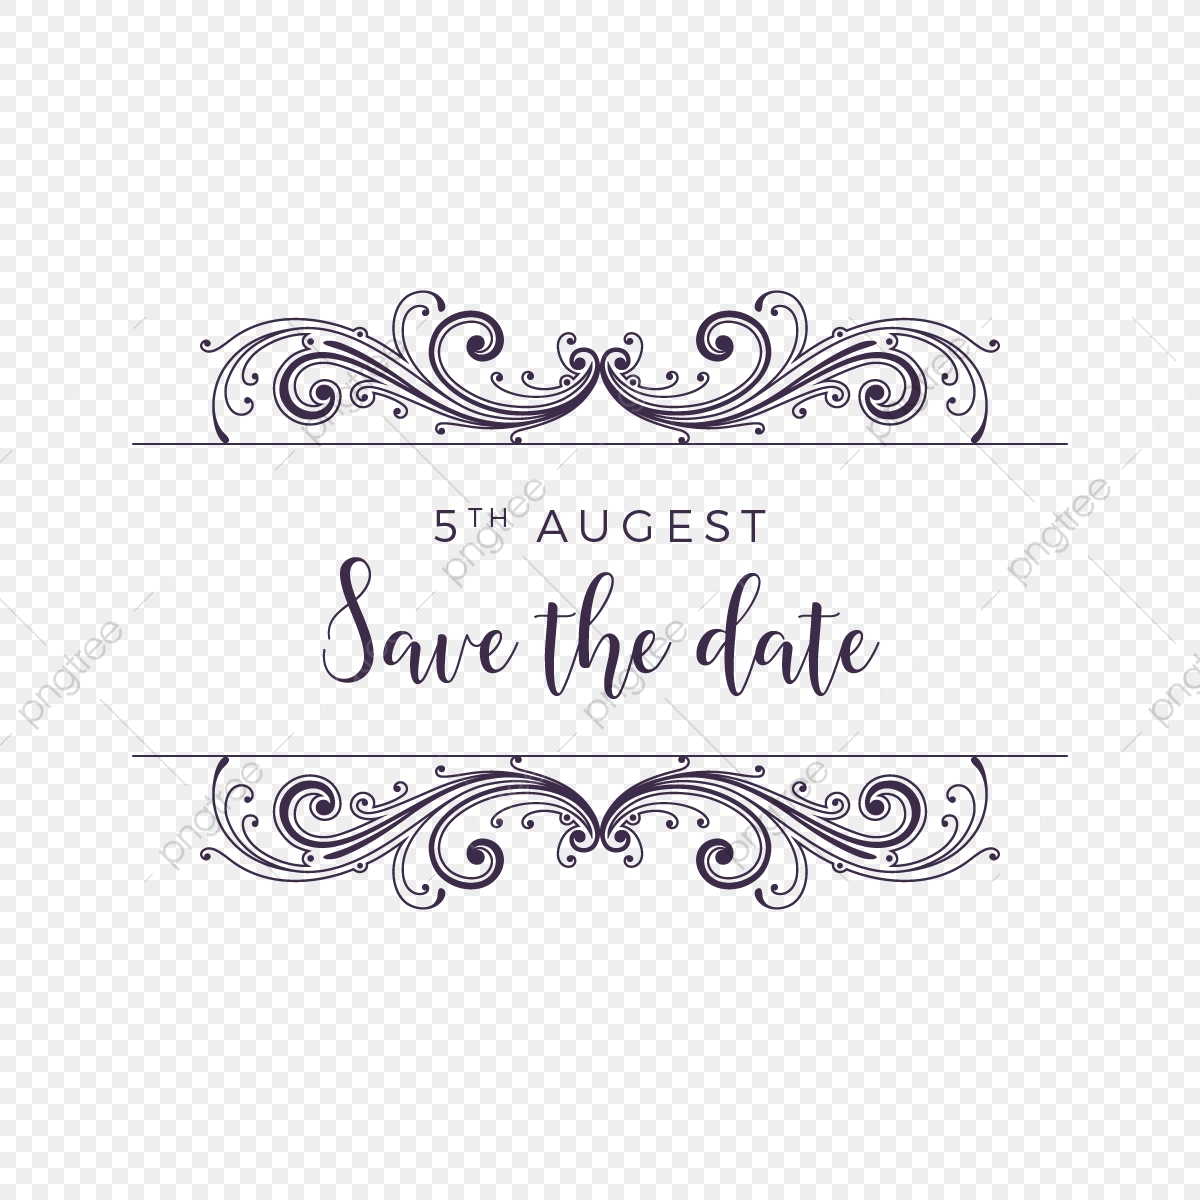 Vintage Style Save The Date Ornament Vector, Vintage.